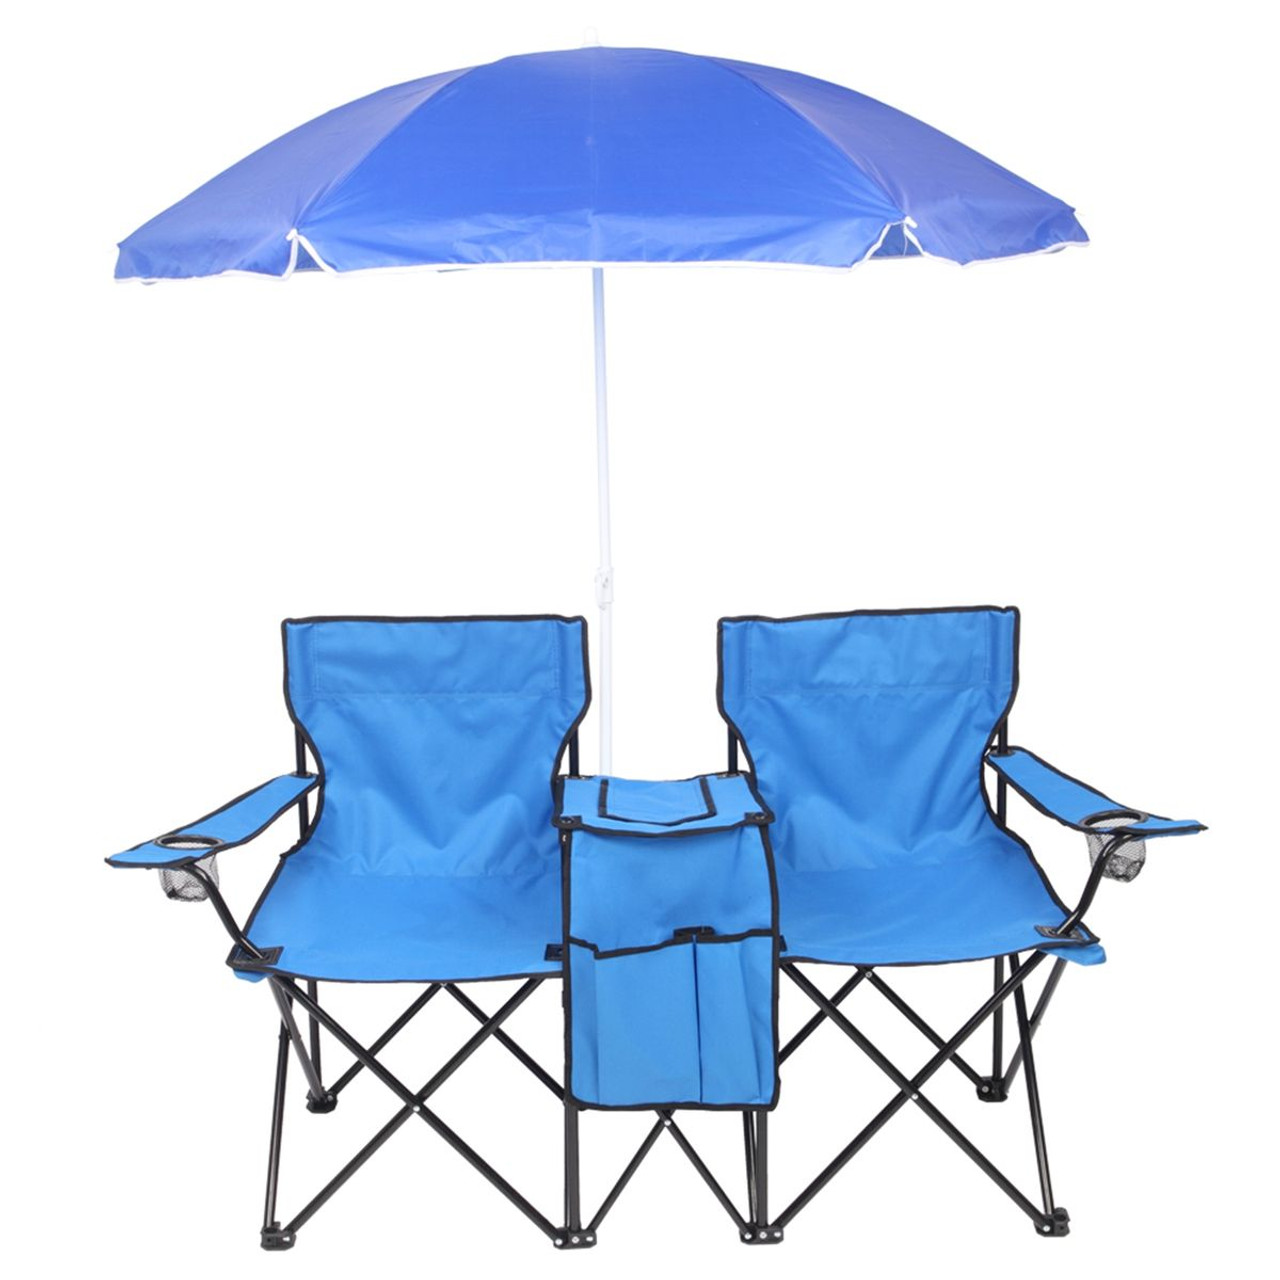 Portable Folding Double Chair with Umbrella product image